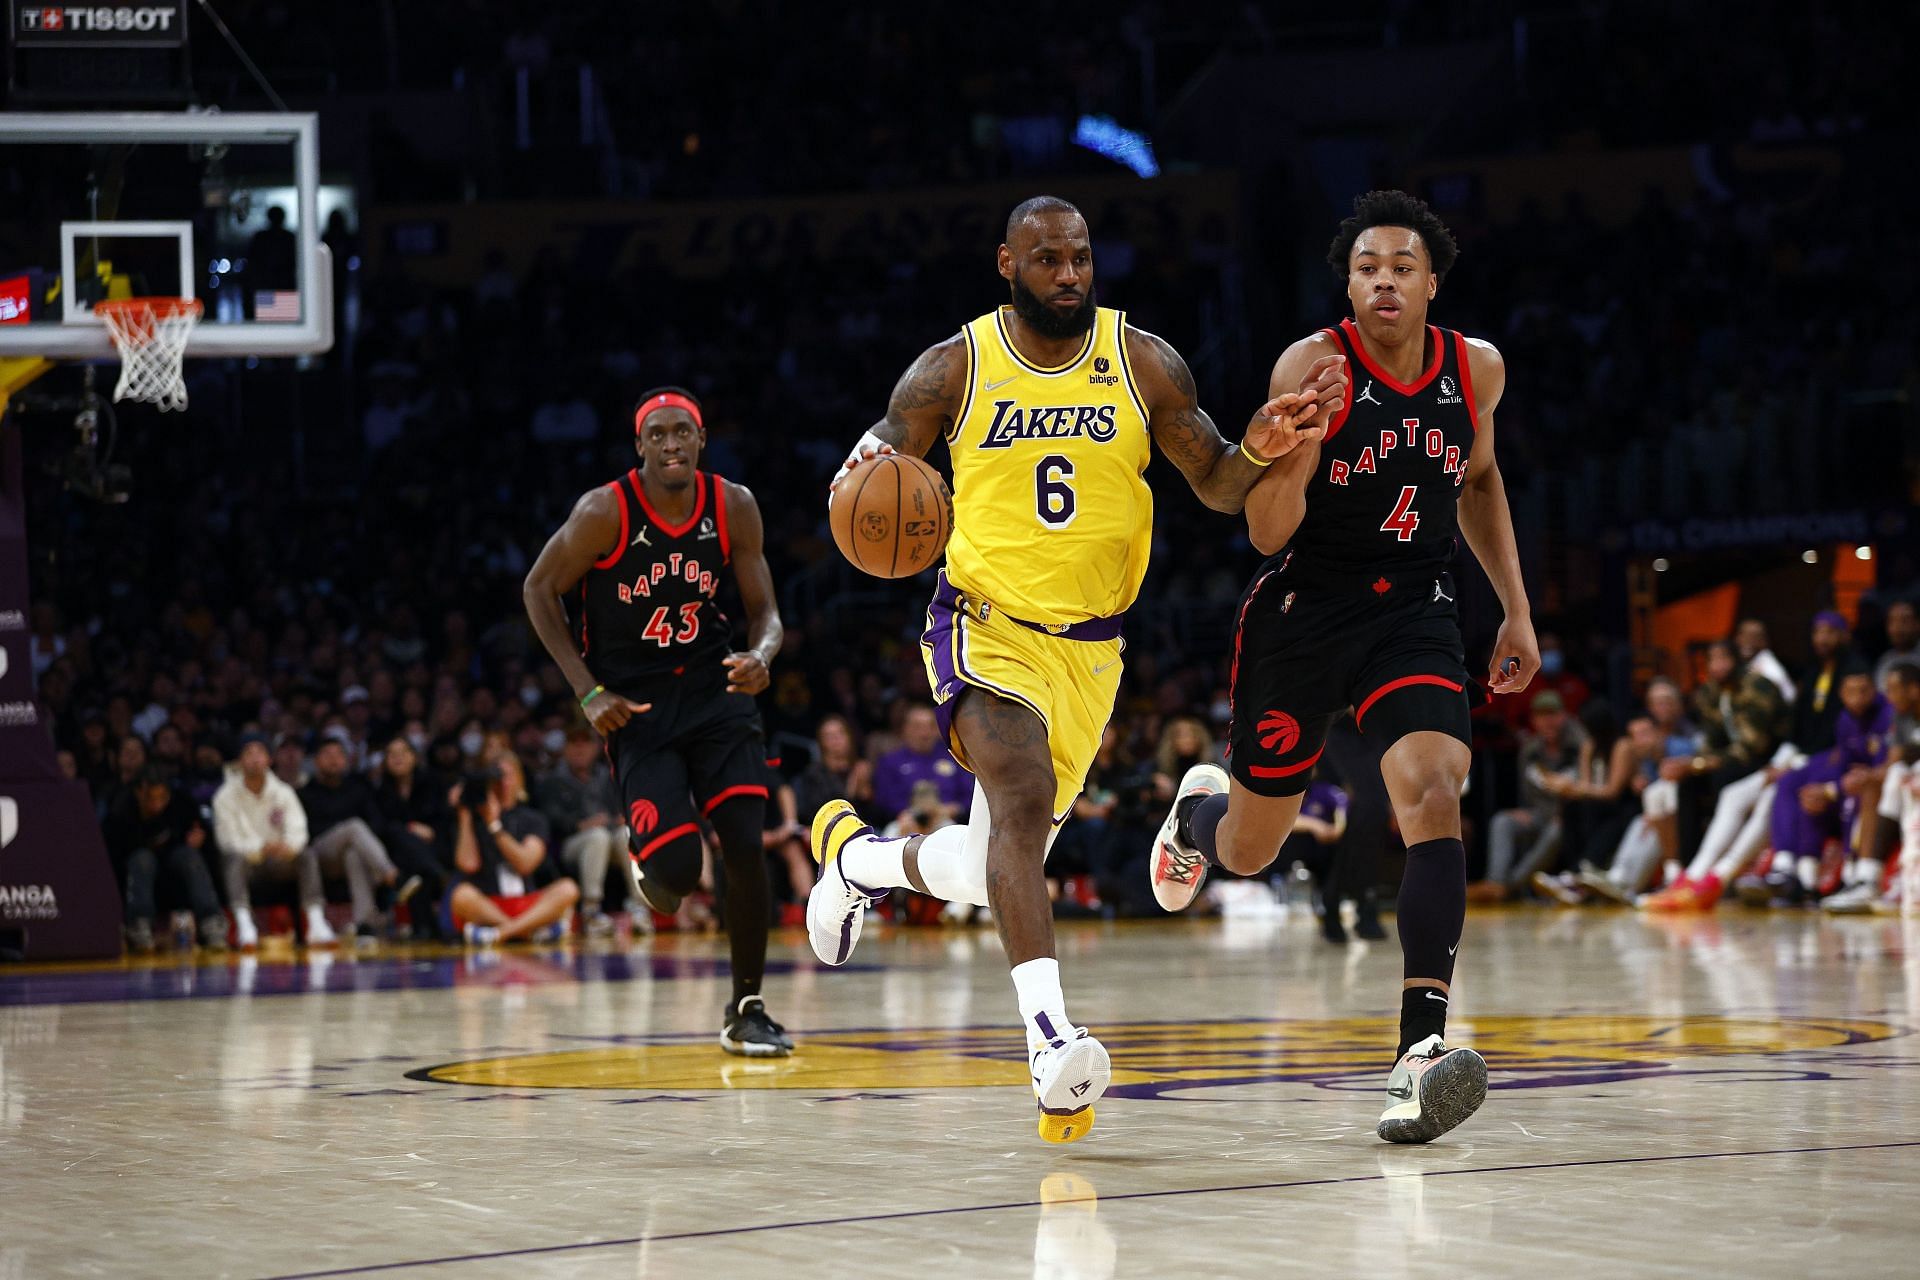 King James in action against the Toronto Raptors